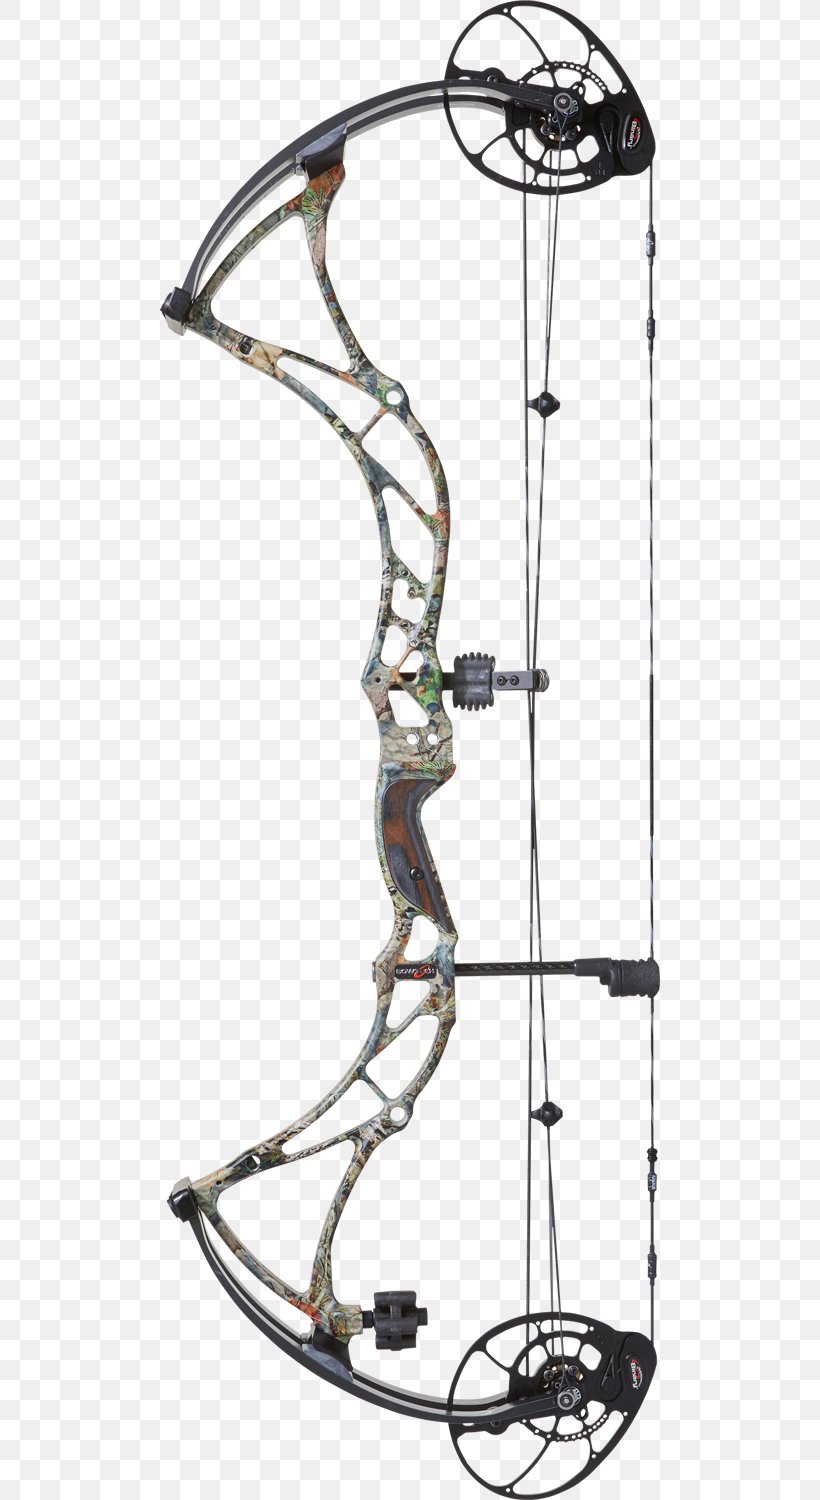 Compound Bows Bow And Arrow Archery Bowhunting Binary Cam, PNG, 500x1500px, Compound Bows, Apex Hunting, Archery, Archery Trade Association, Binary Cam Download Free